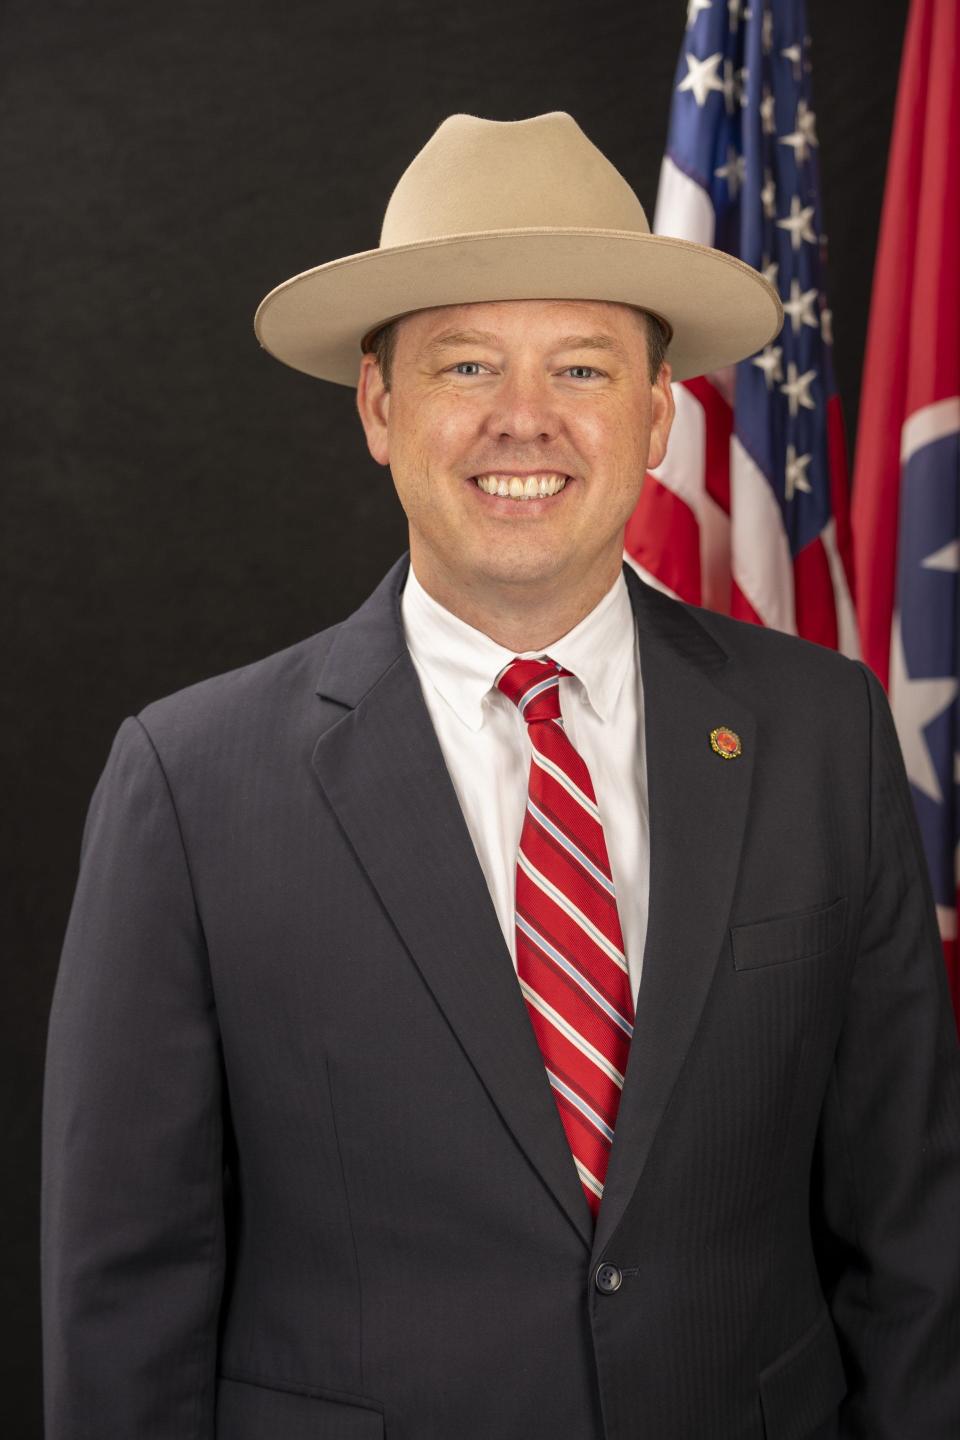 District Attorney Frederick H. Agee, the DA for Crockett, Gibson and Haywood Counties, is prosecuting Shelby County Criminal Court Judge A. Melissa Boyd's criminal case. He was assigned the case after Shelby County DA Steve Mulroy recused his office from prosecuting.